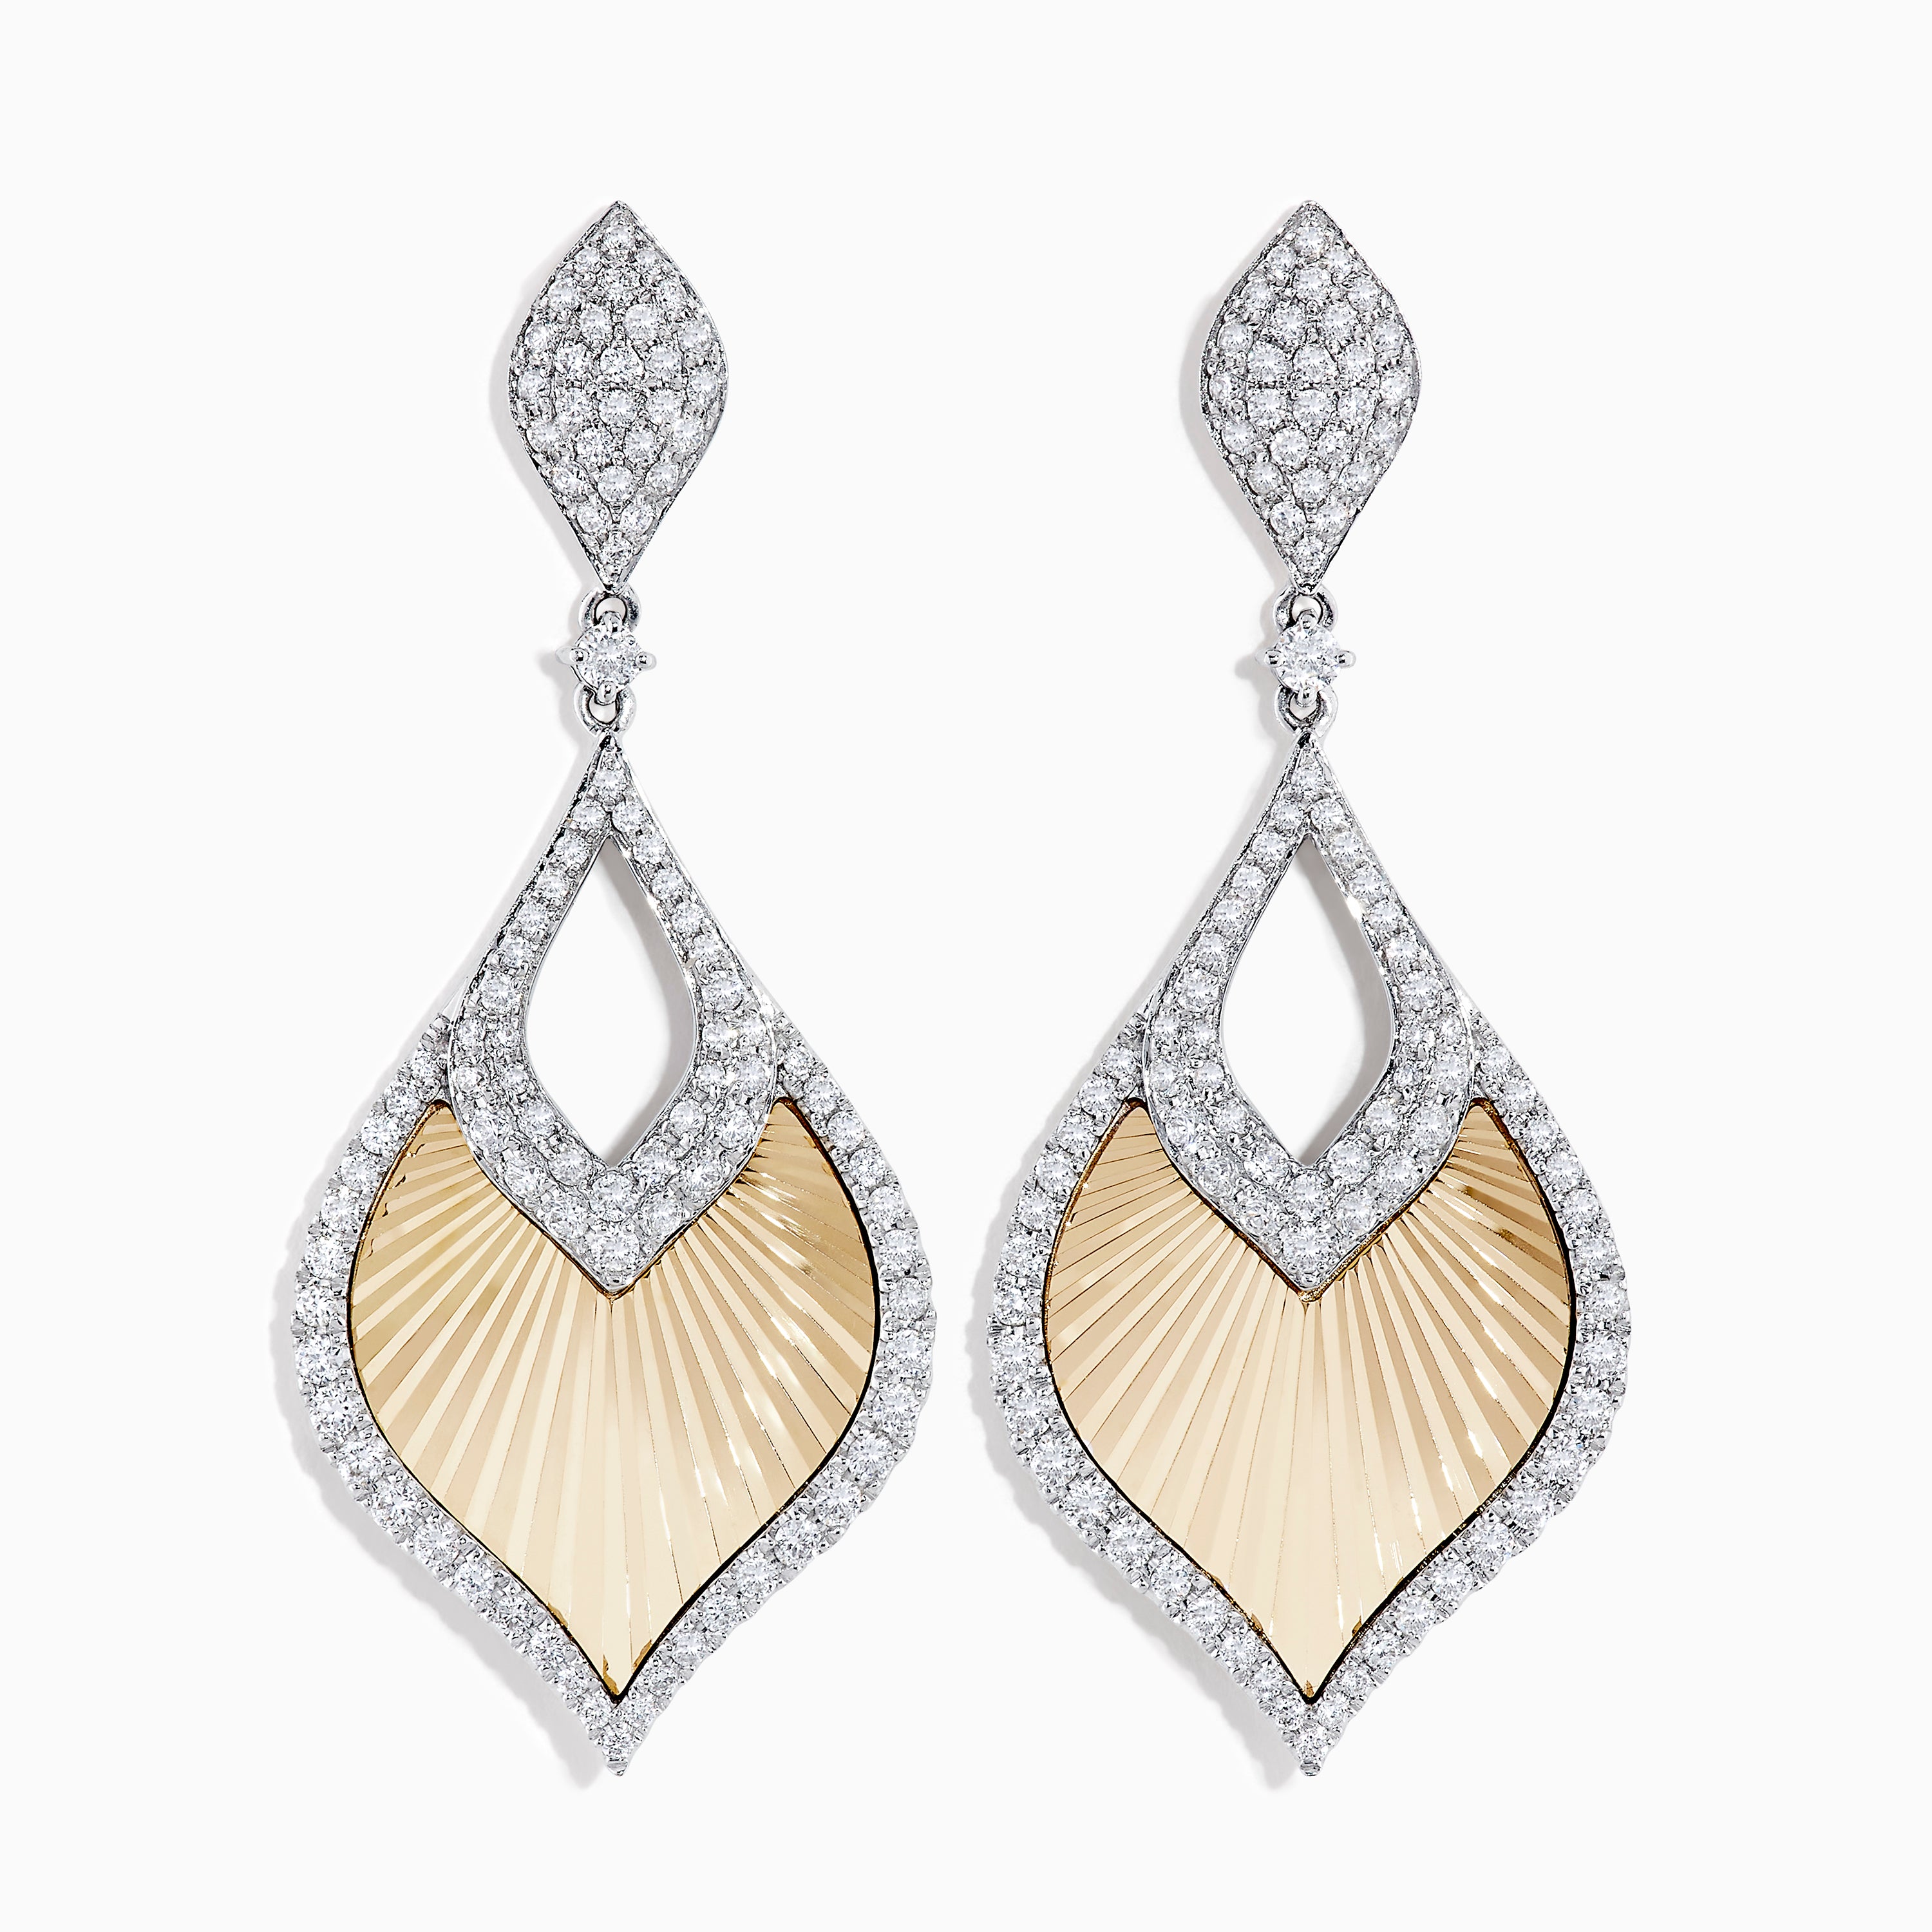 Buy Gold Earrings For Women Online In India At Lowest Prices | Tata CLiQ